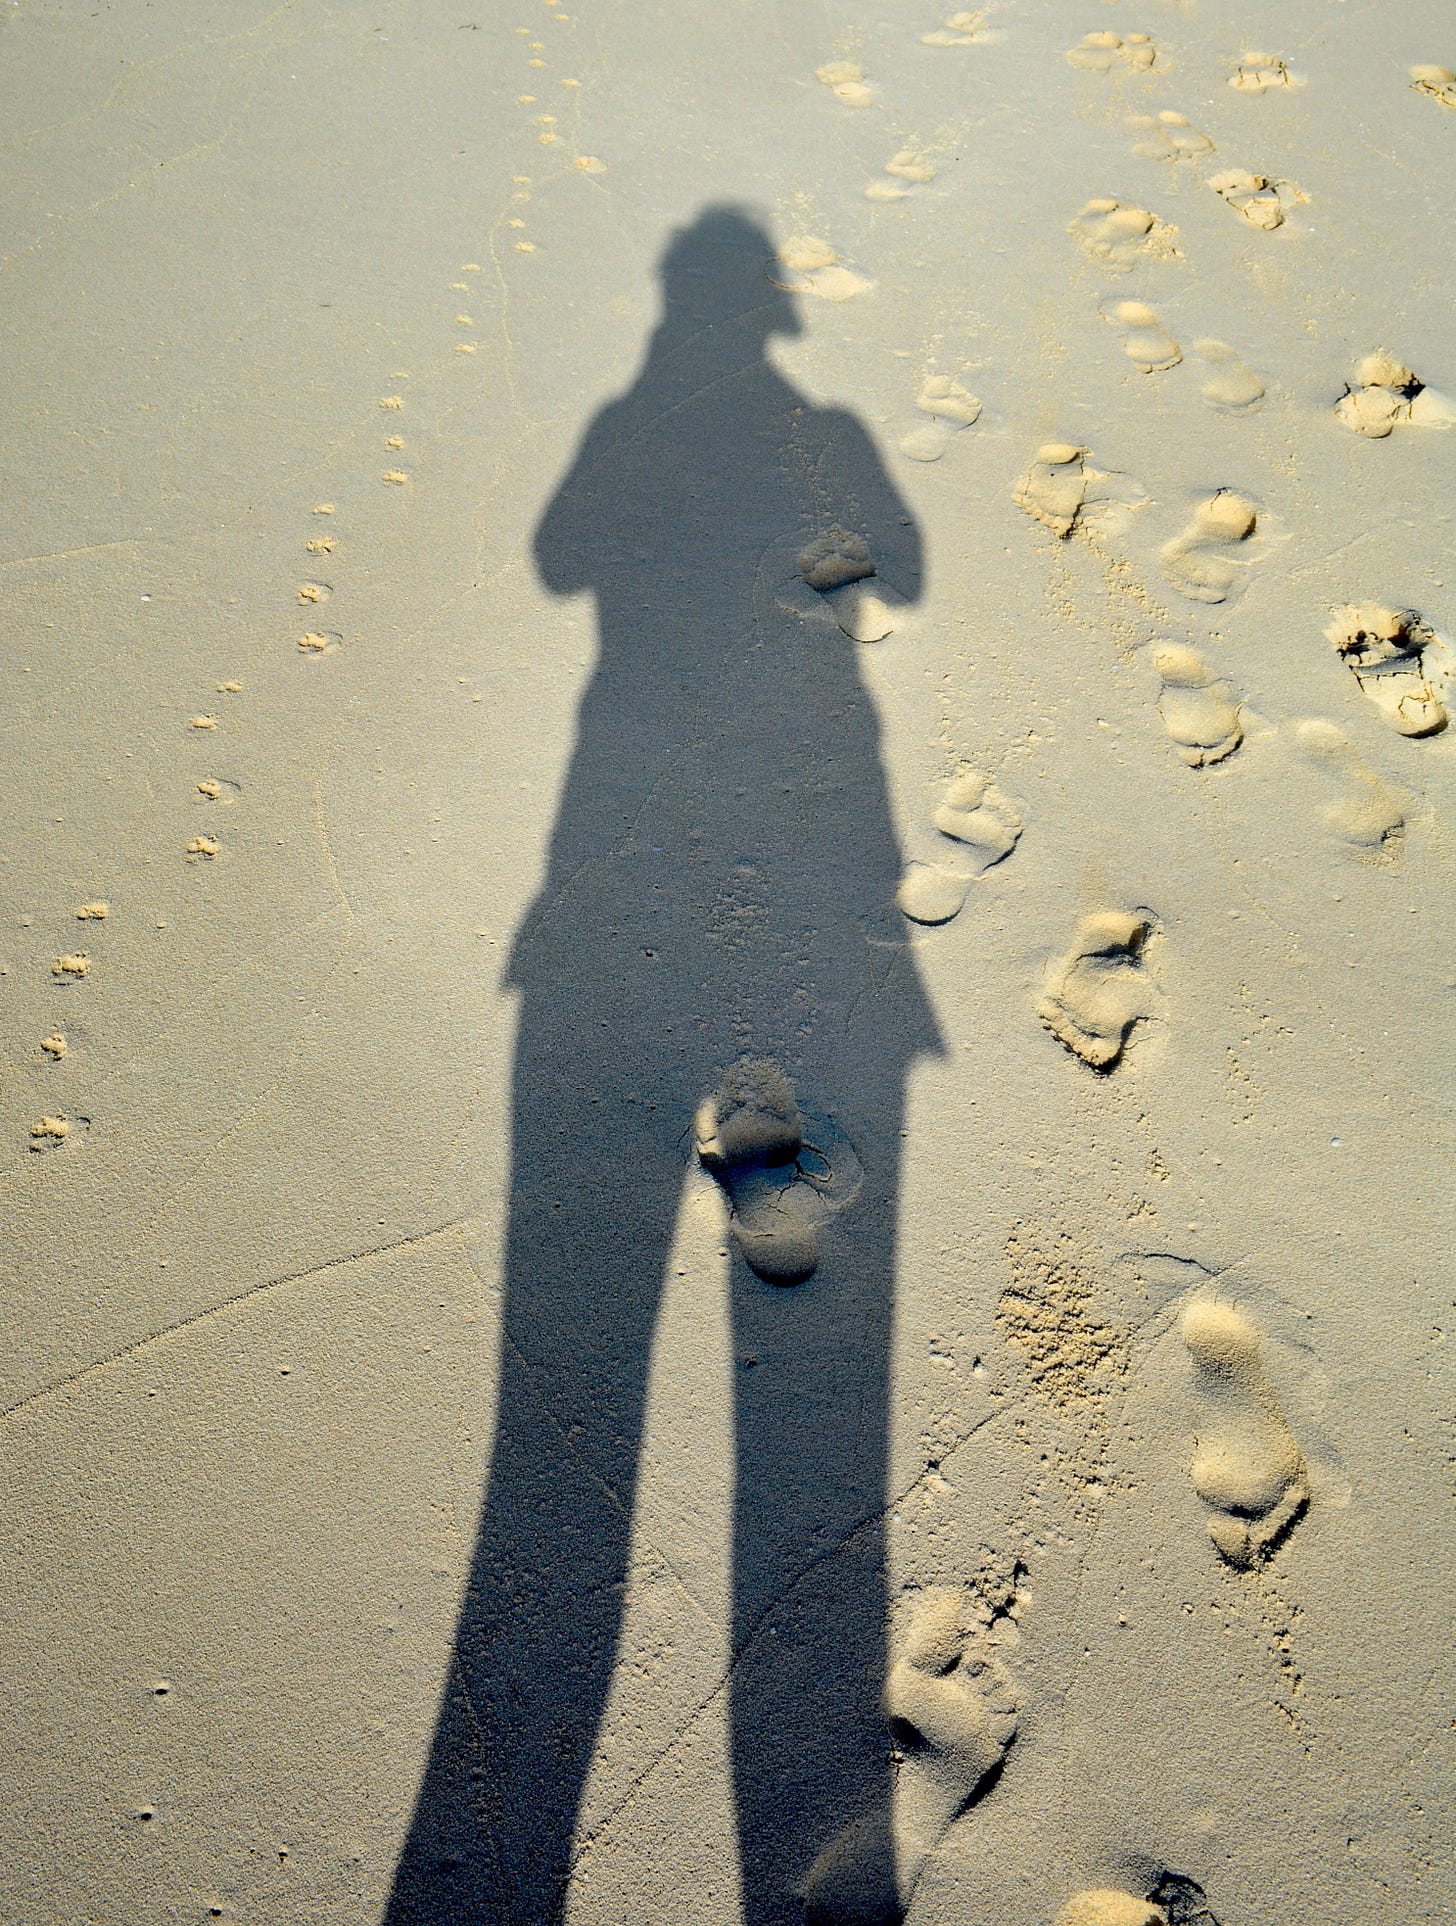 The shadow of a woman staning on the the sandy shore, footprints next to her shadow